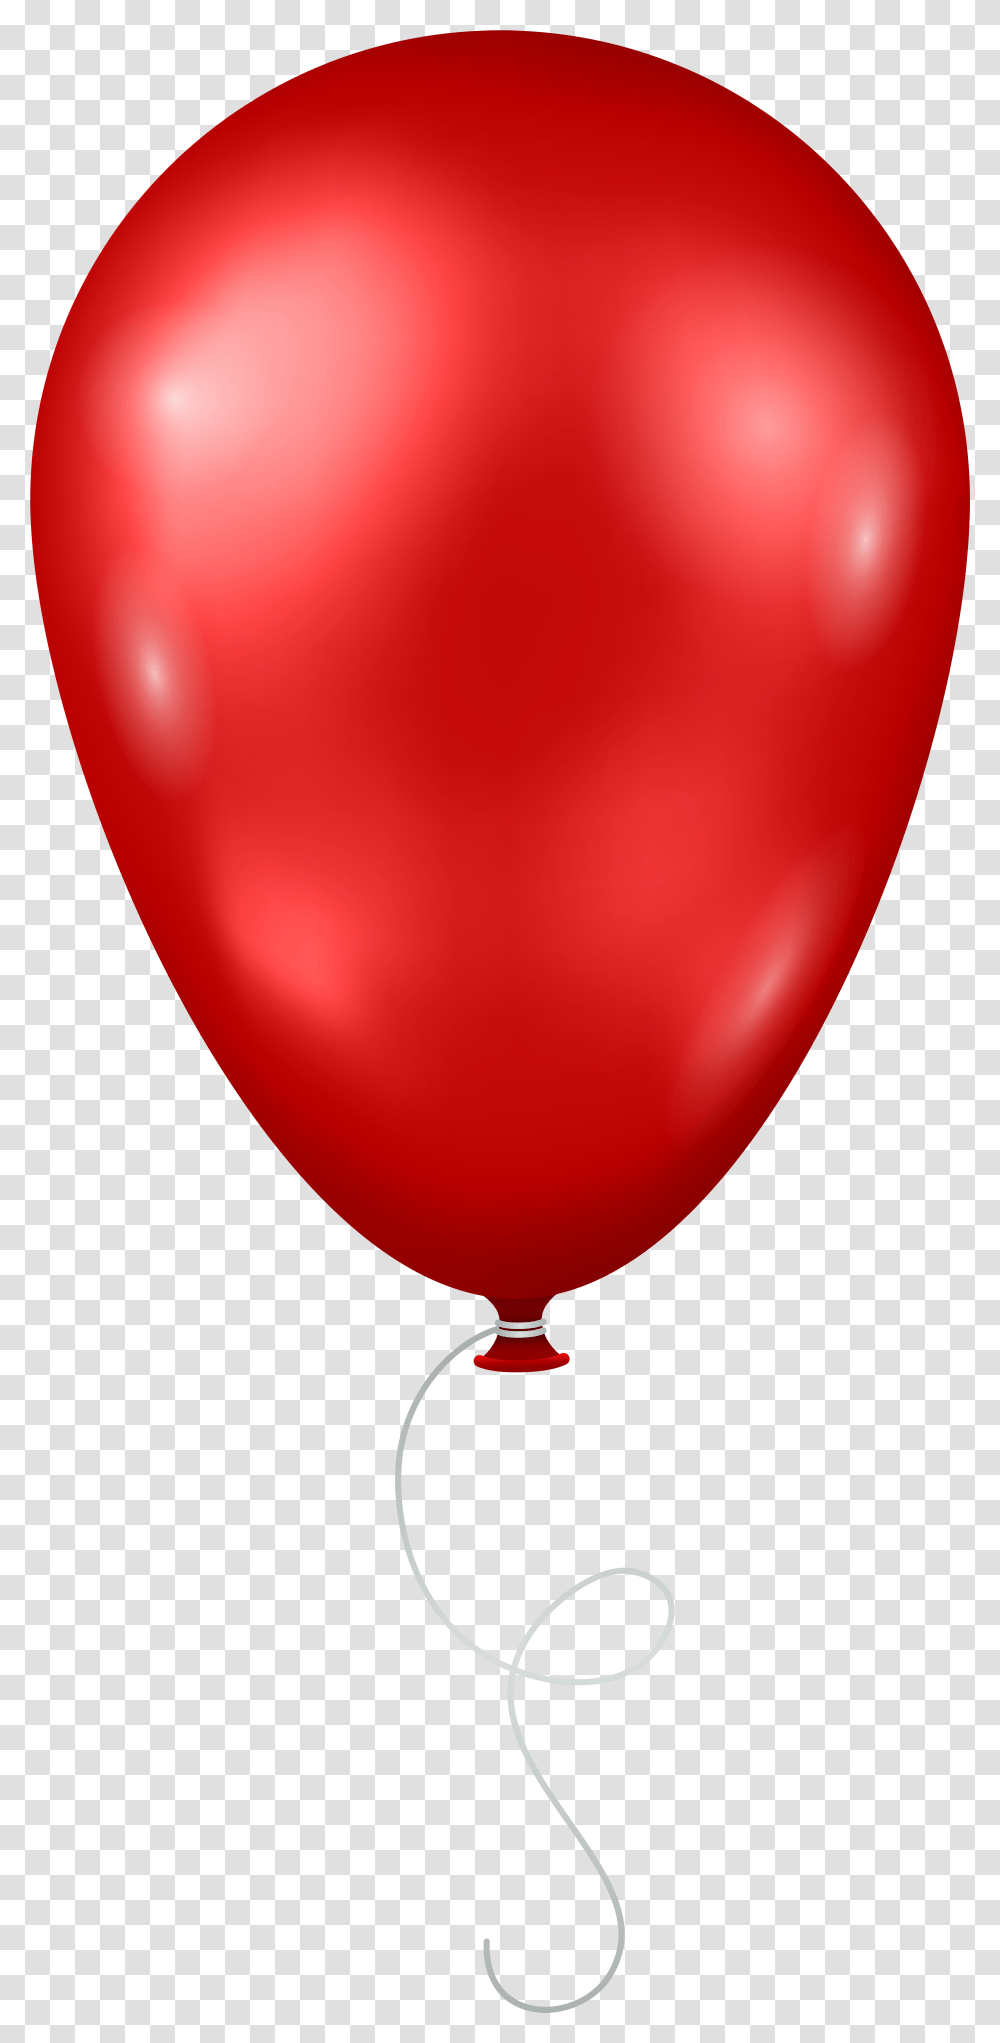 Hd Red Balloon Background Background Red Balloon Transparent Png